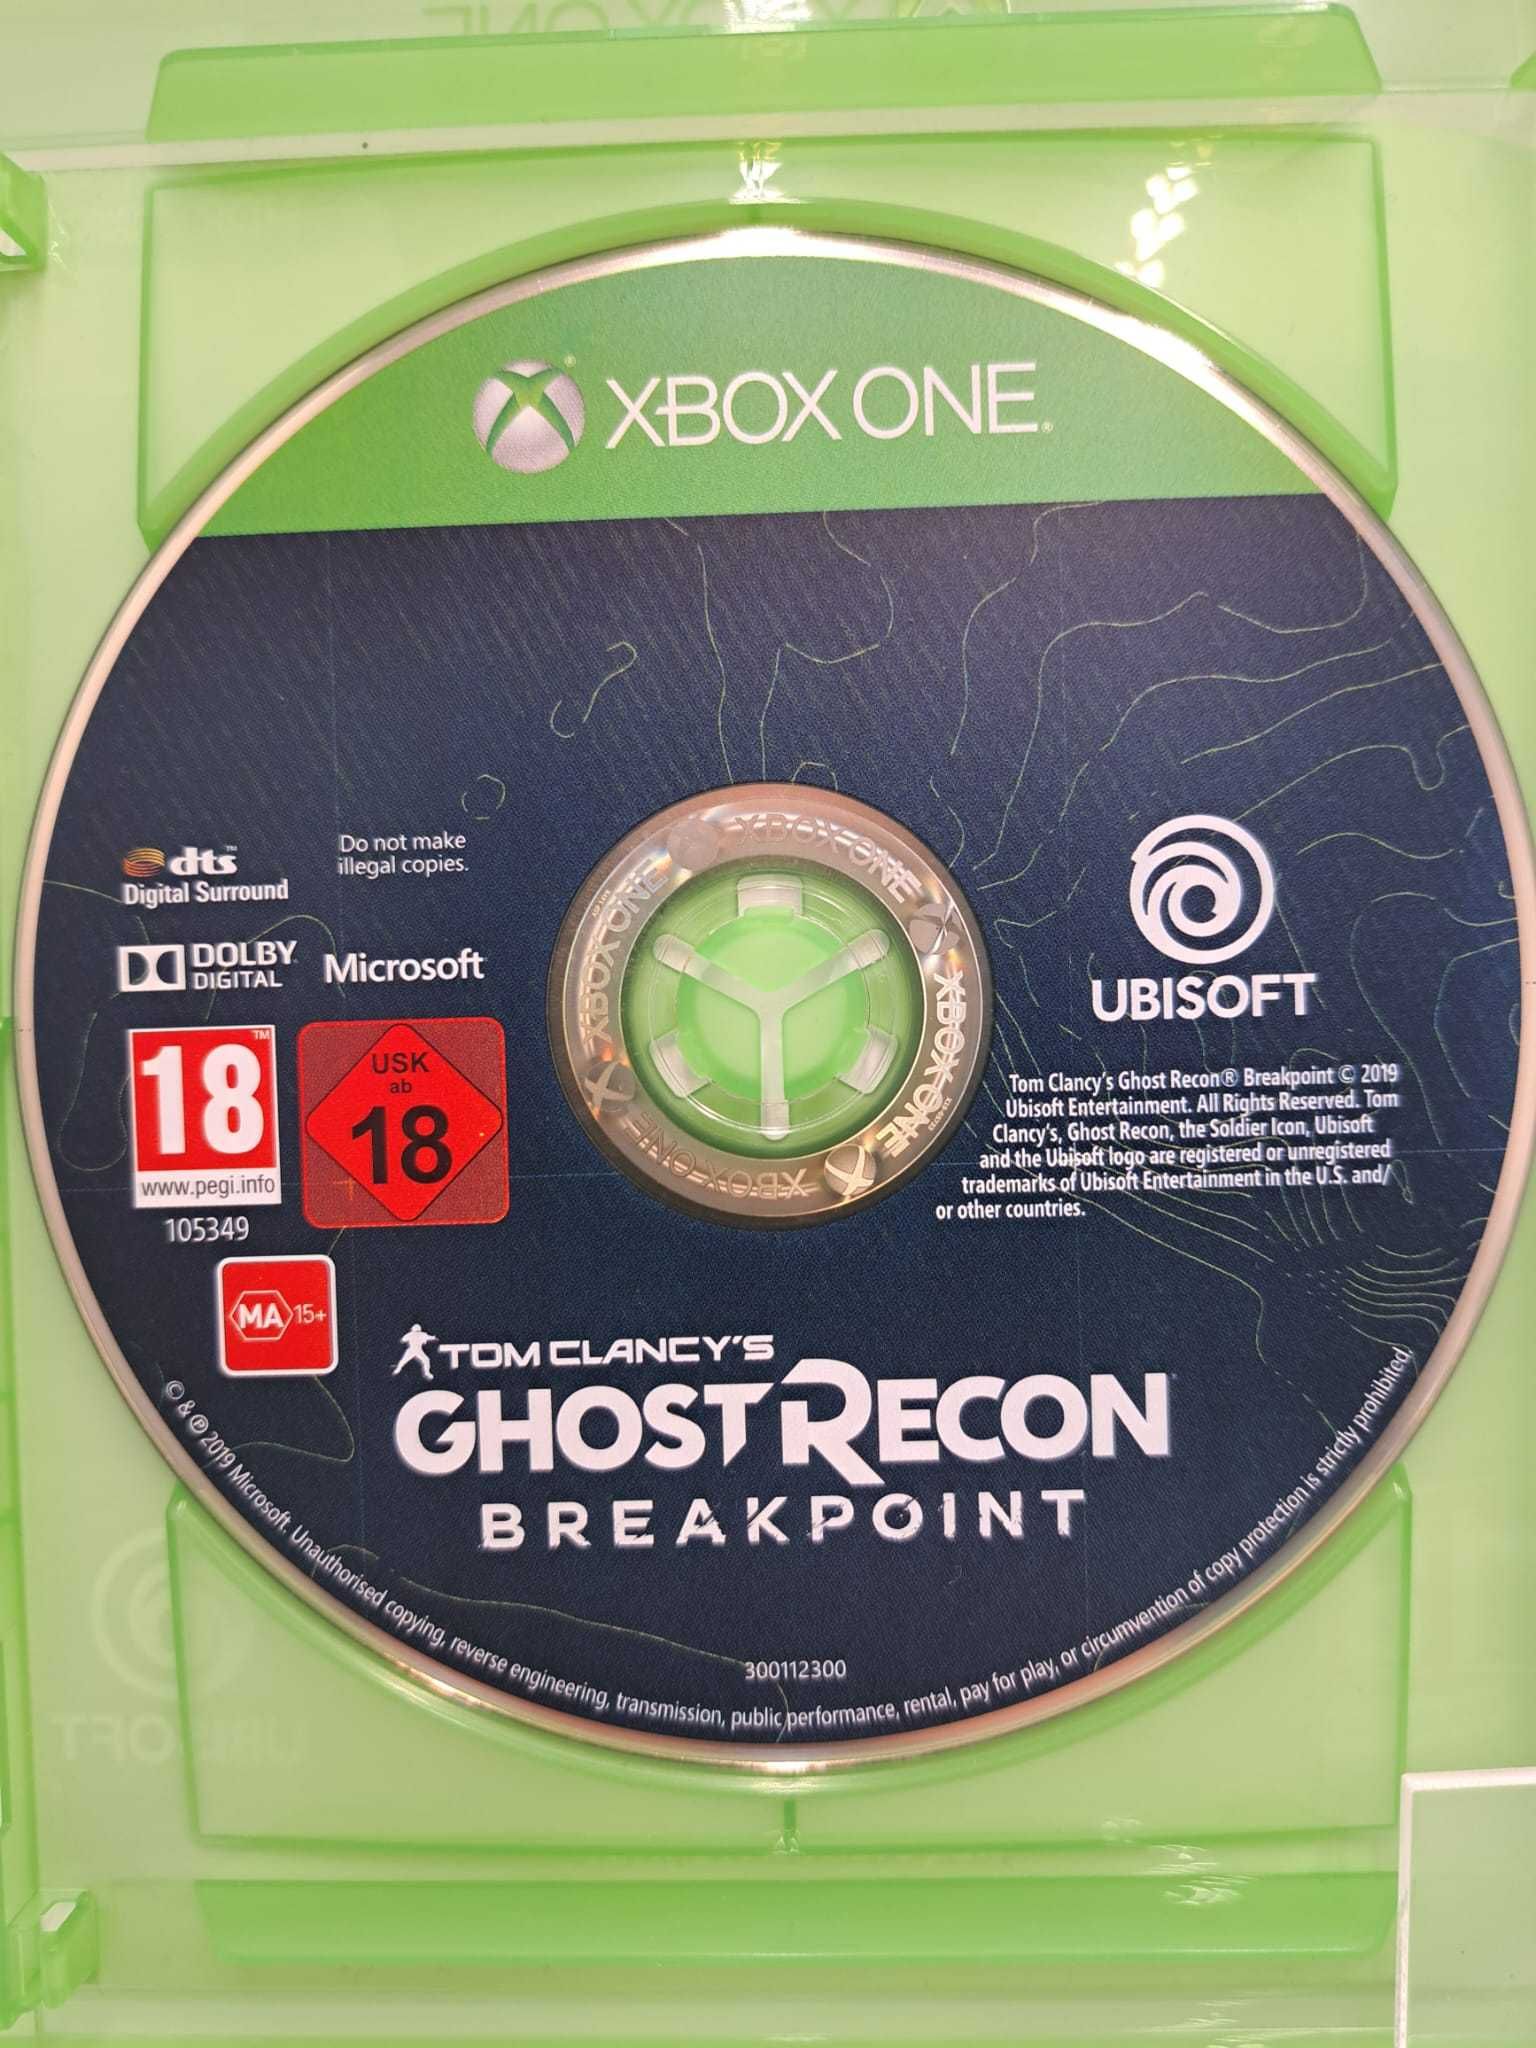 Tom Clancy's Chost Recon Breakpoint Xbox One